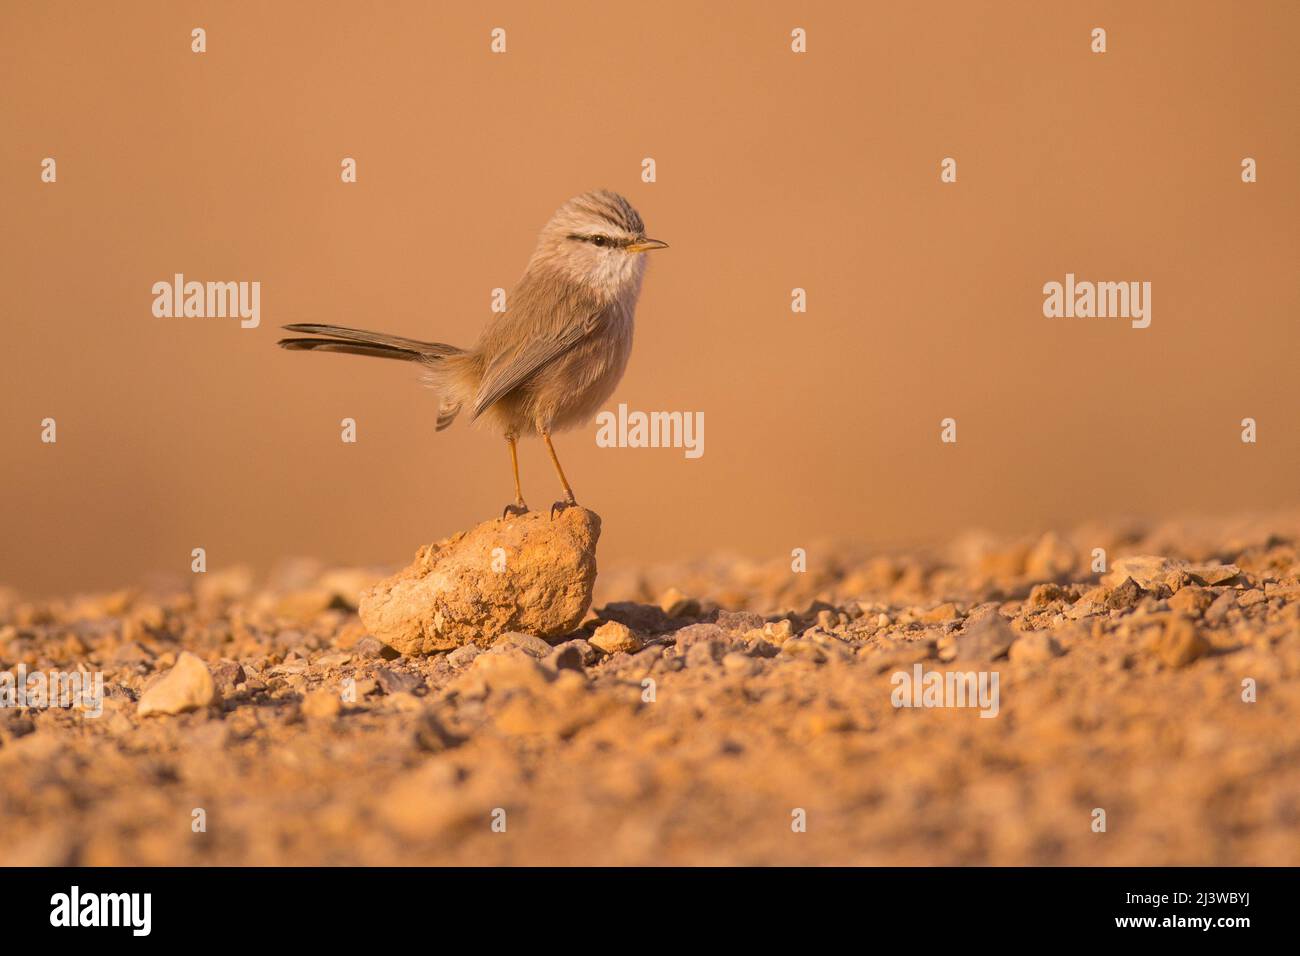 streaked scrub warbler (Scotocerca inquieta), on the ground searching for food, Photographed in Israel in November Stock Photo